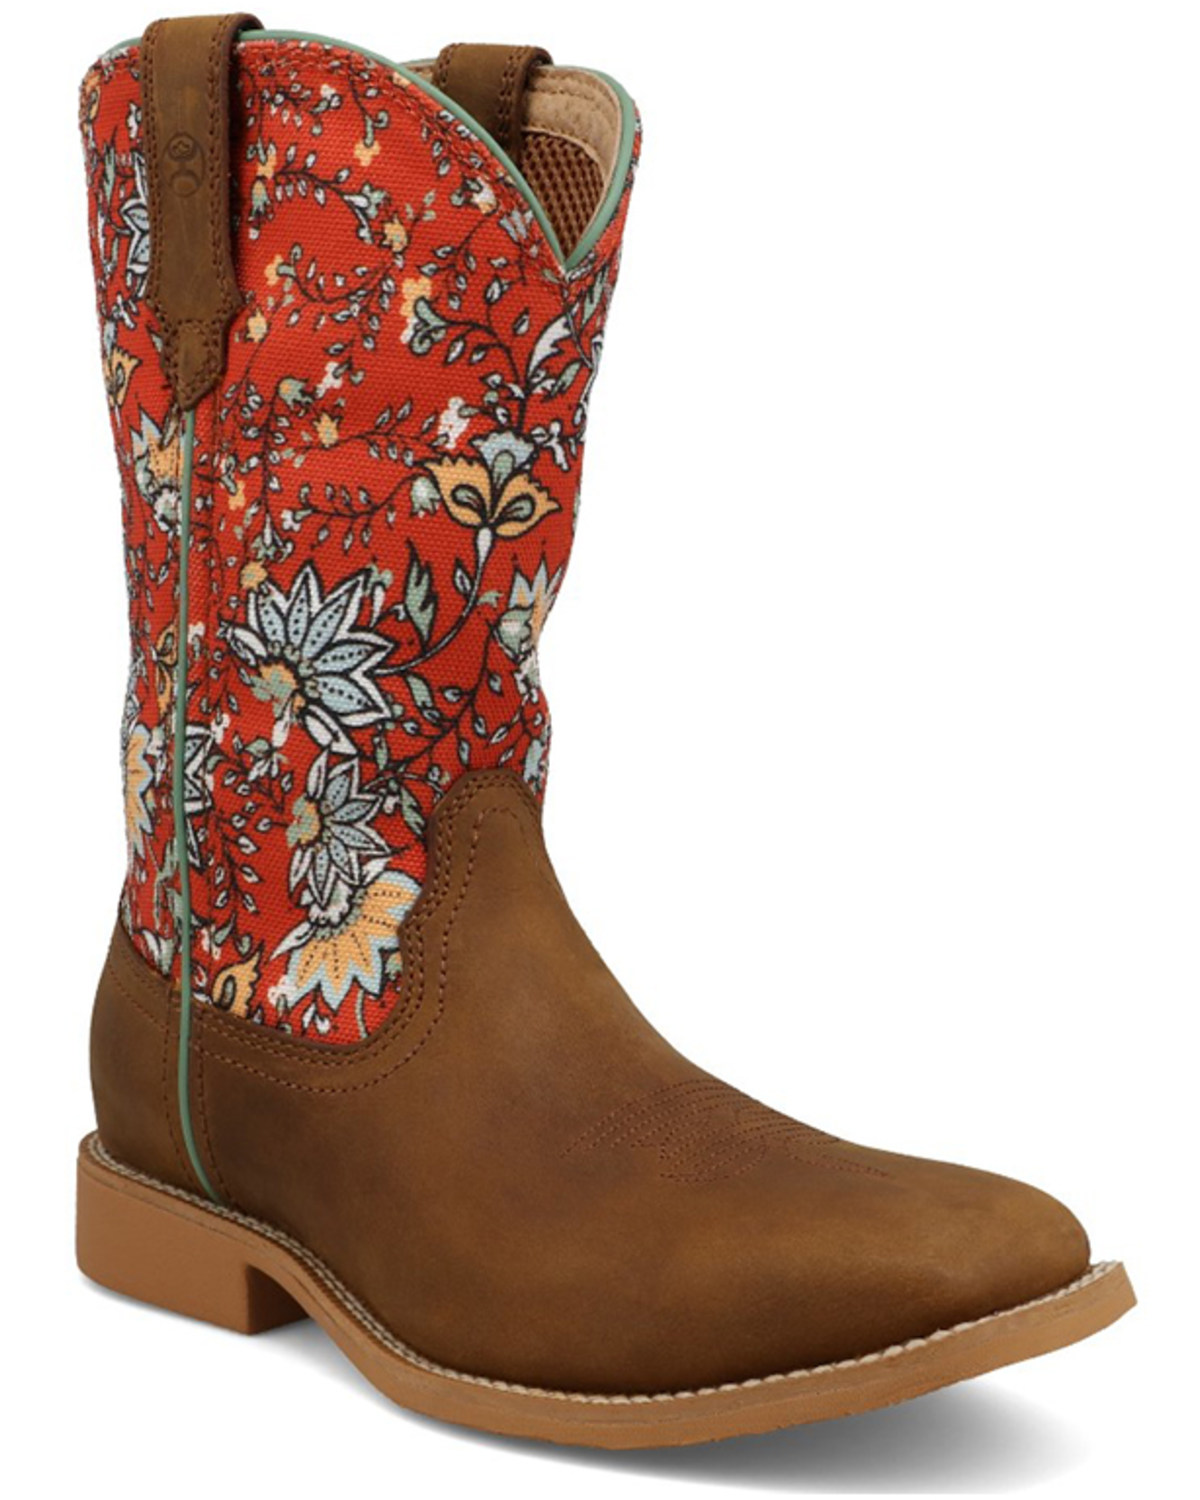 Hooey by Twisted X Girls' Floral Western Boots - Broad Square Toe